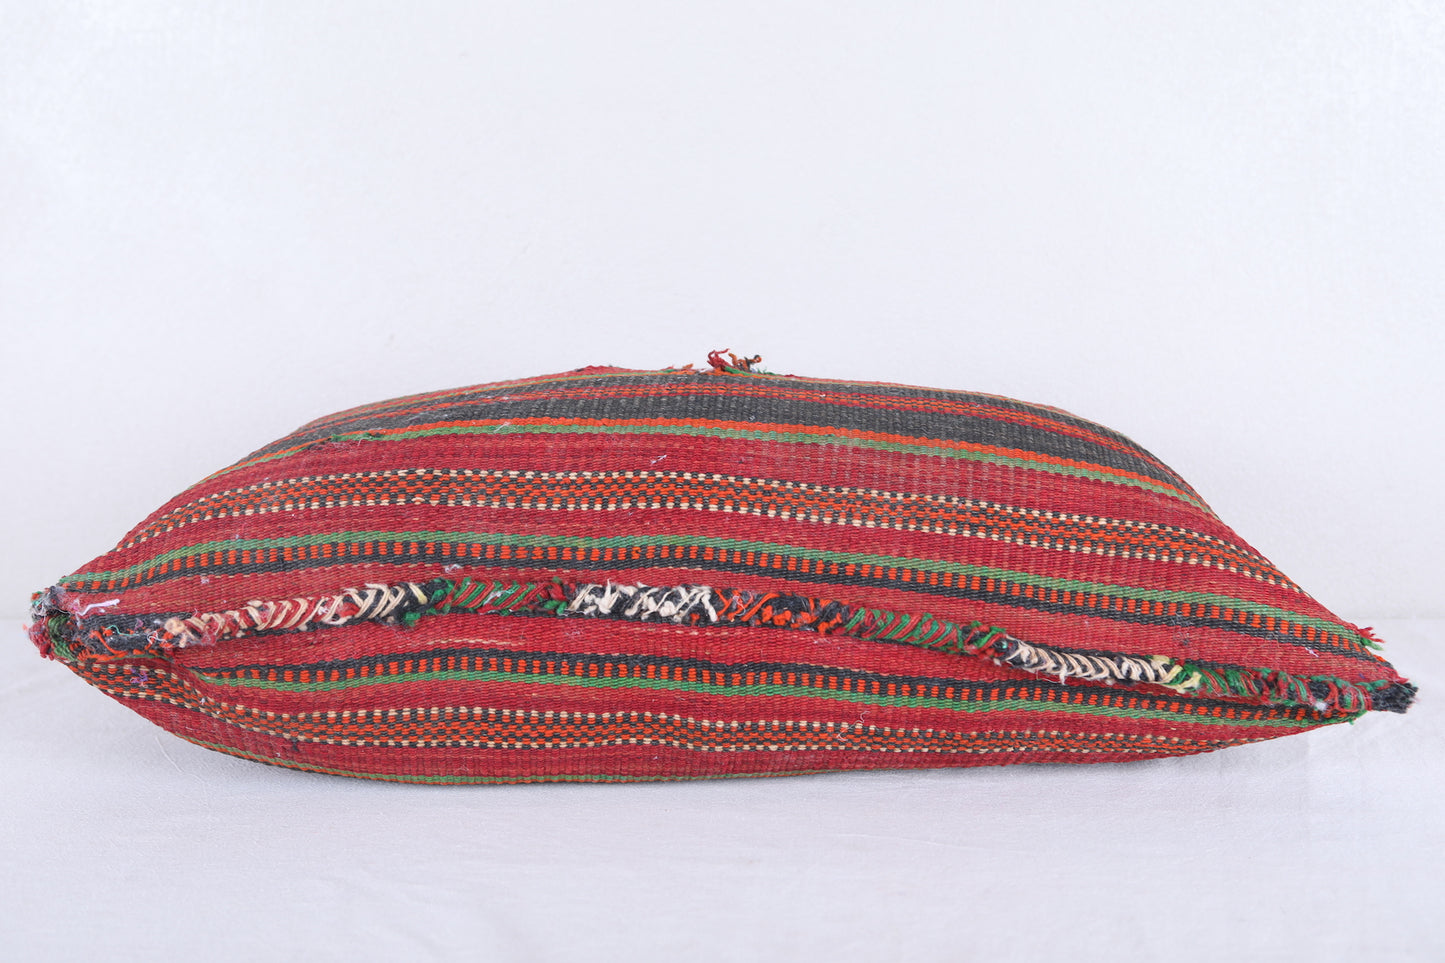 Vintage moroccan handwoven kilim pillow 19.6 INCHES X 28.3 INCHES